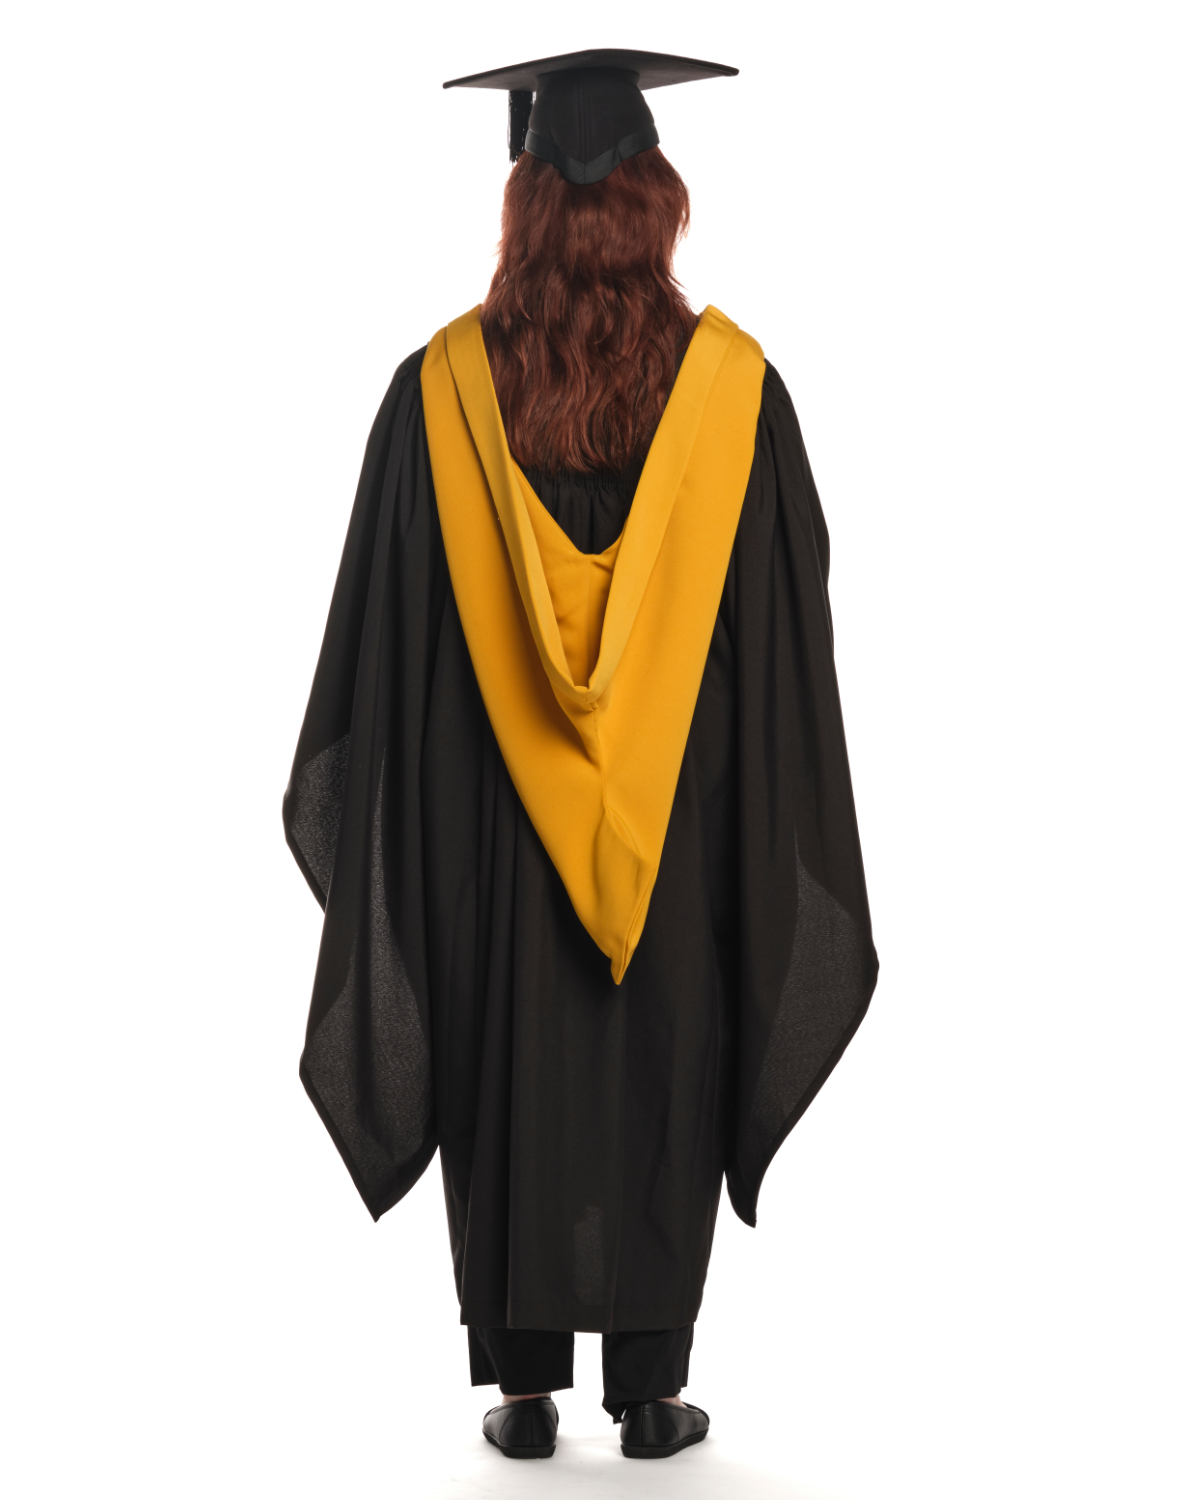 University of Bath | Foundation Gown, Cap and Hood Set